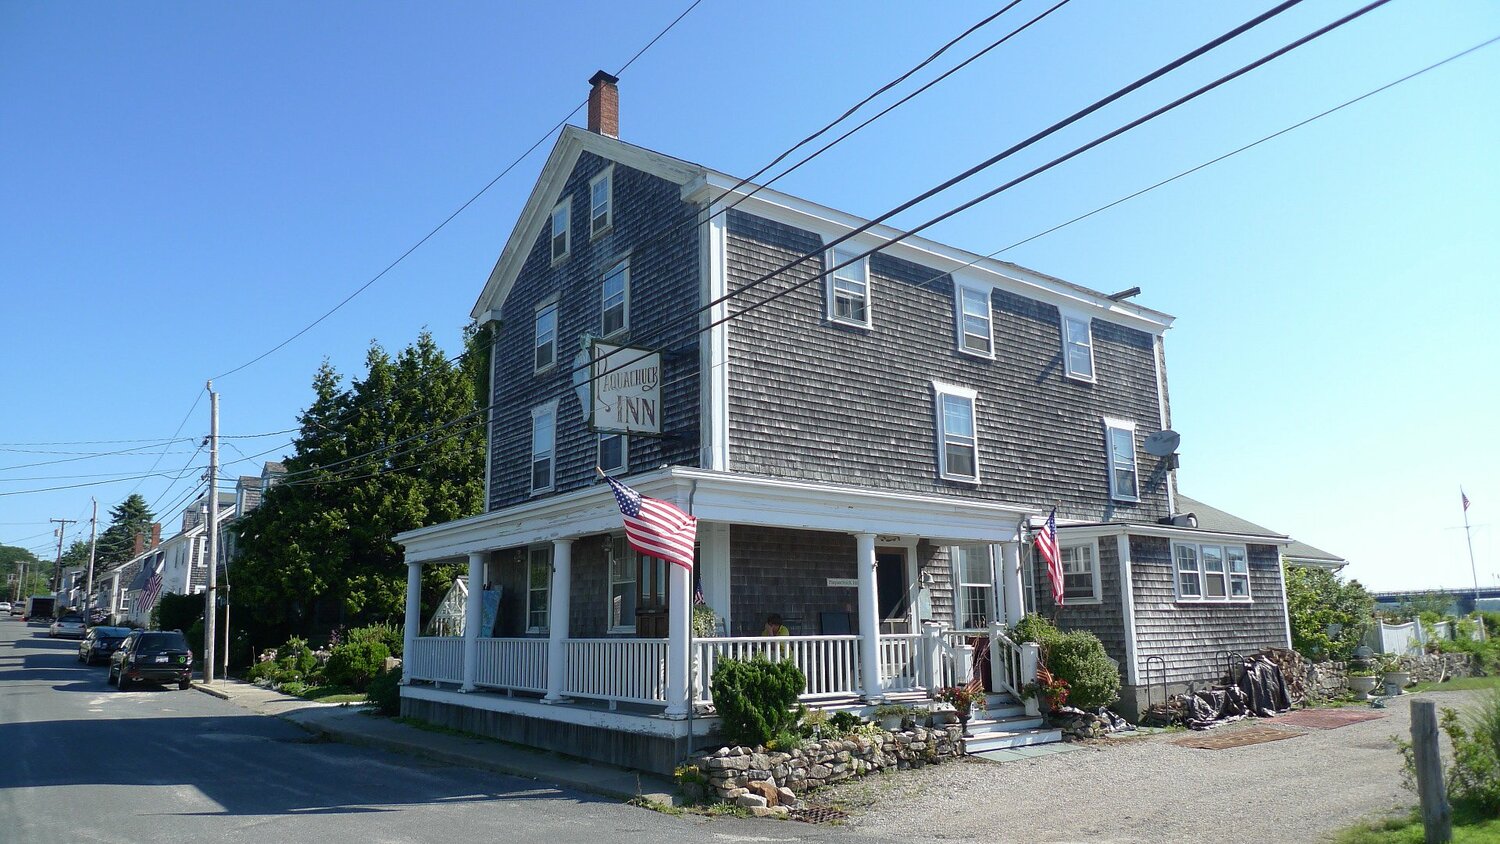 The most expensive short term rental in Westport is the Paquachuck Inn at Westport Point. The nine-bedroom inn is listed on the AirBnB website for $13,580 for a week’s stay.